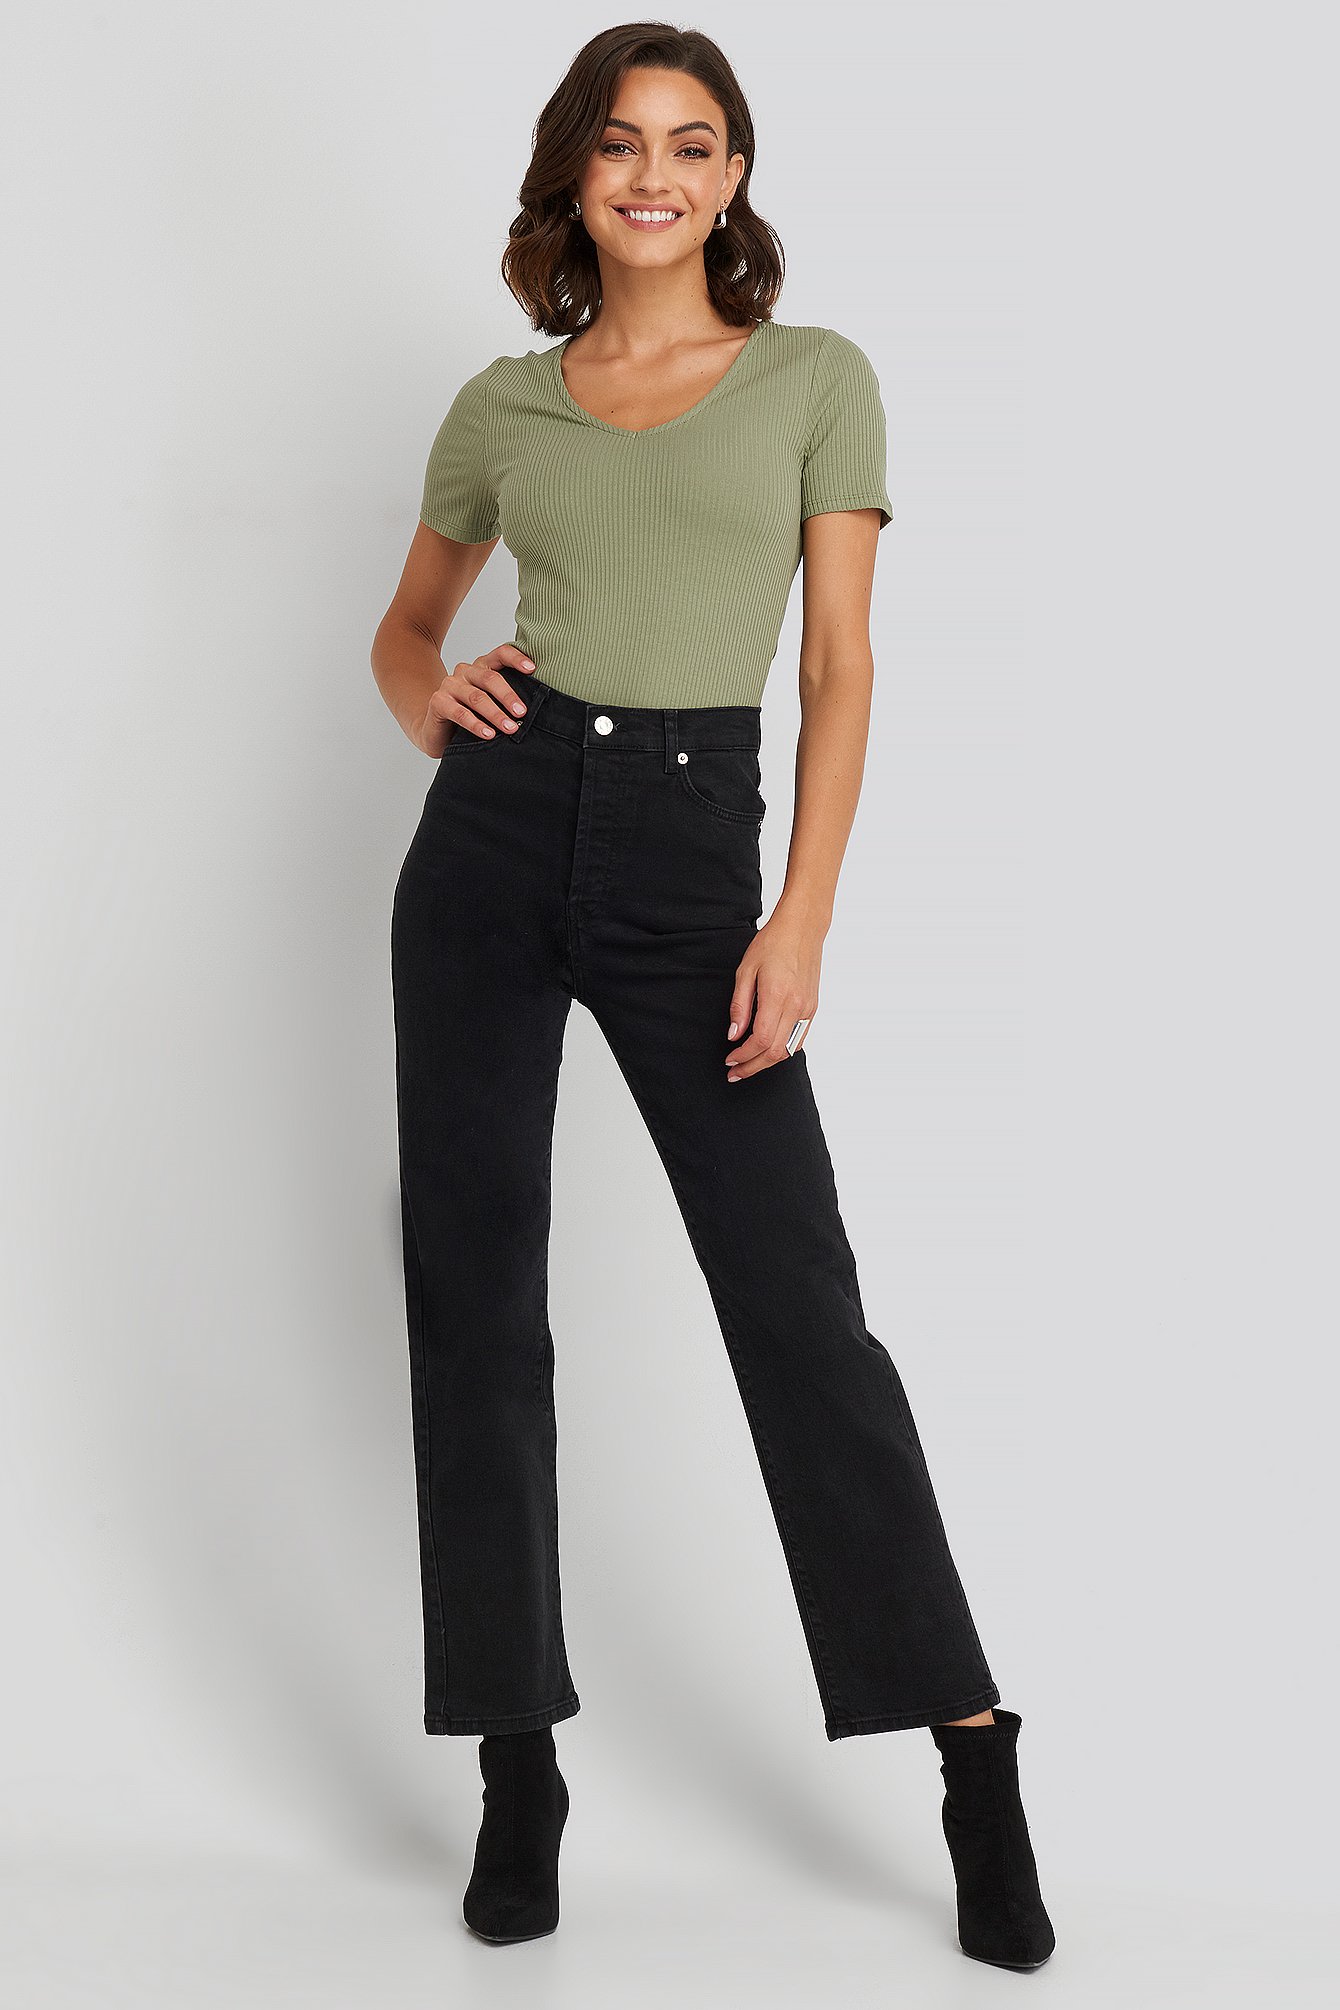 high waisted black jeans with belt